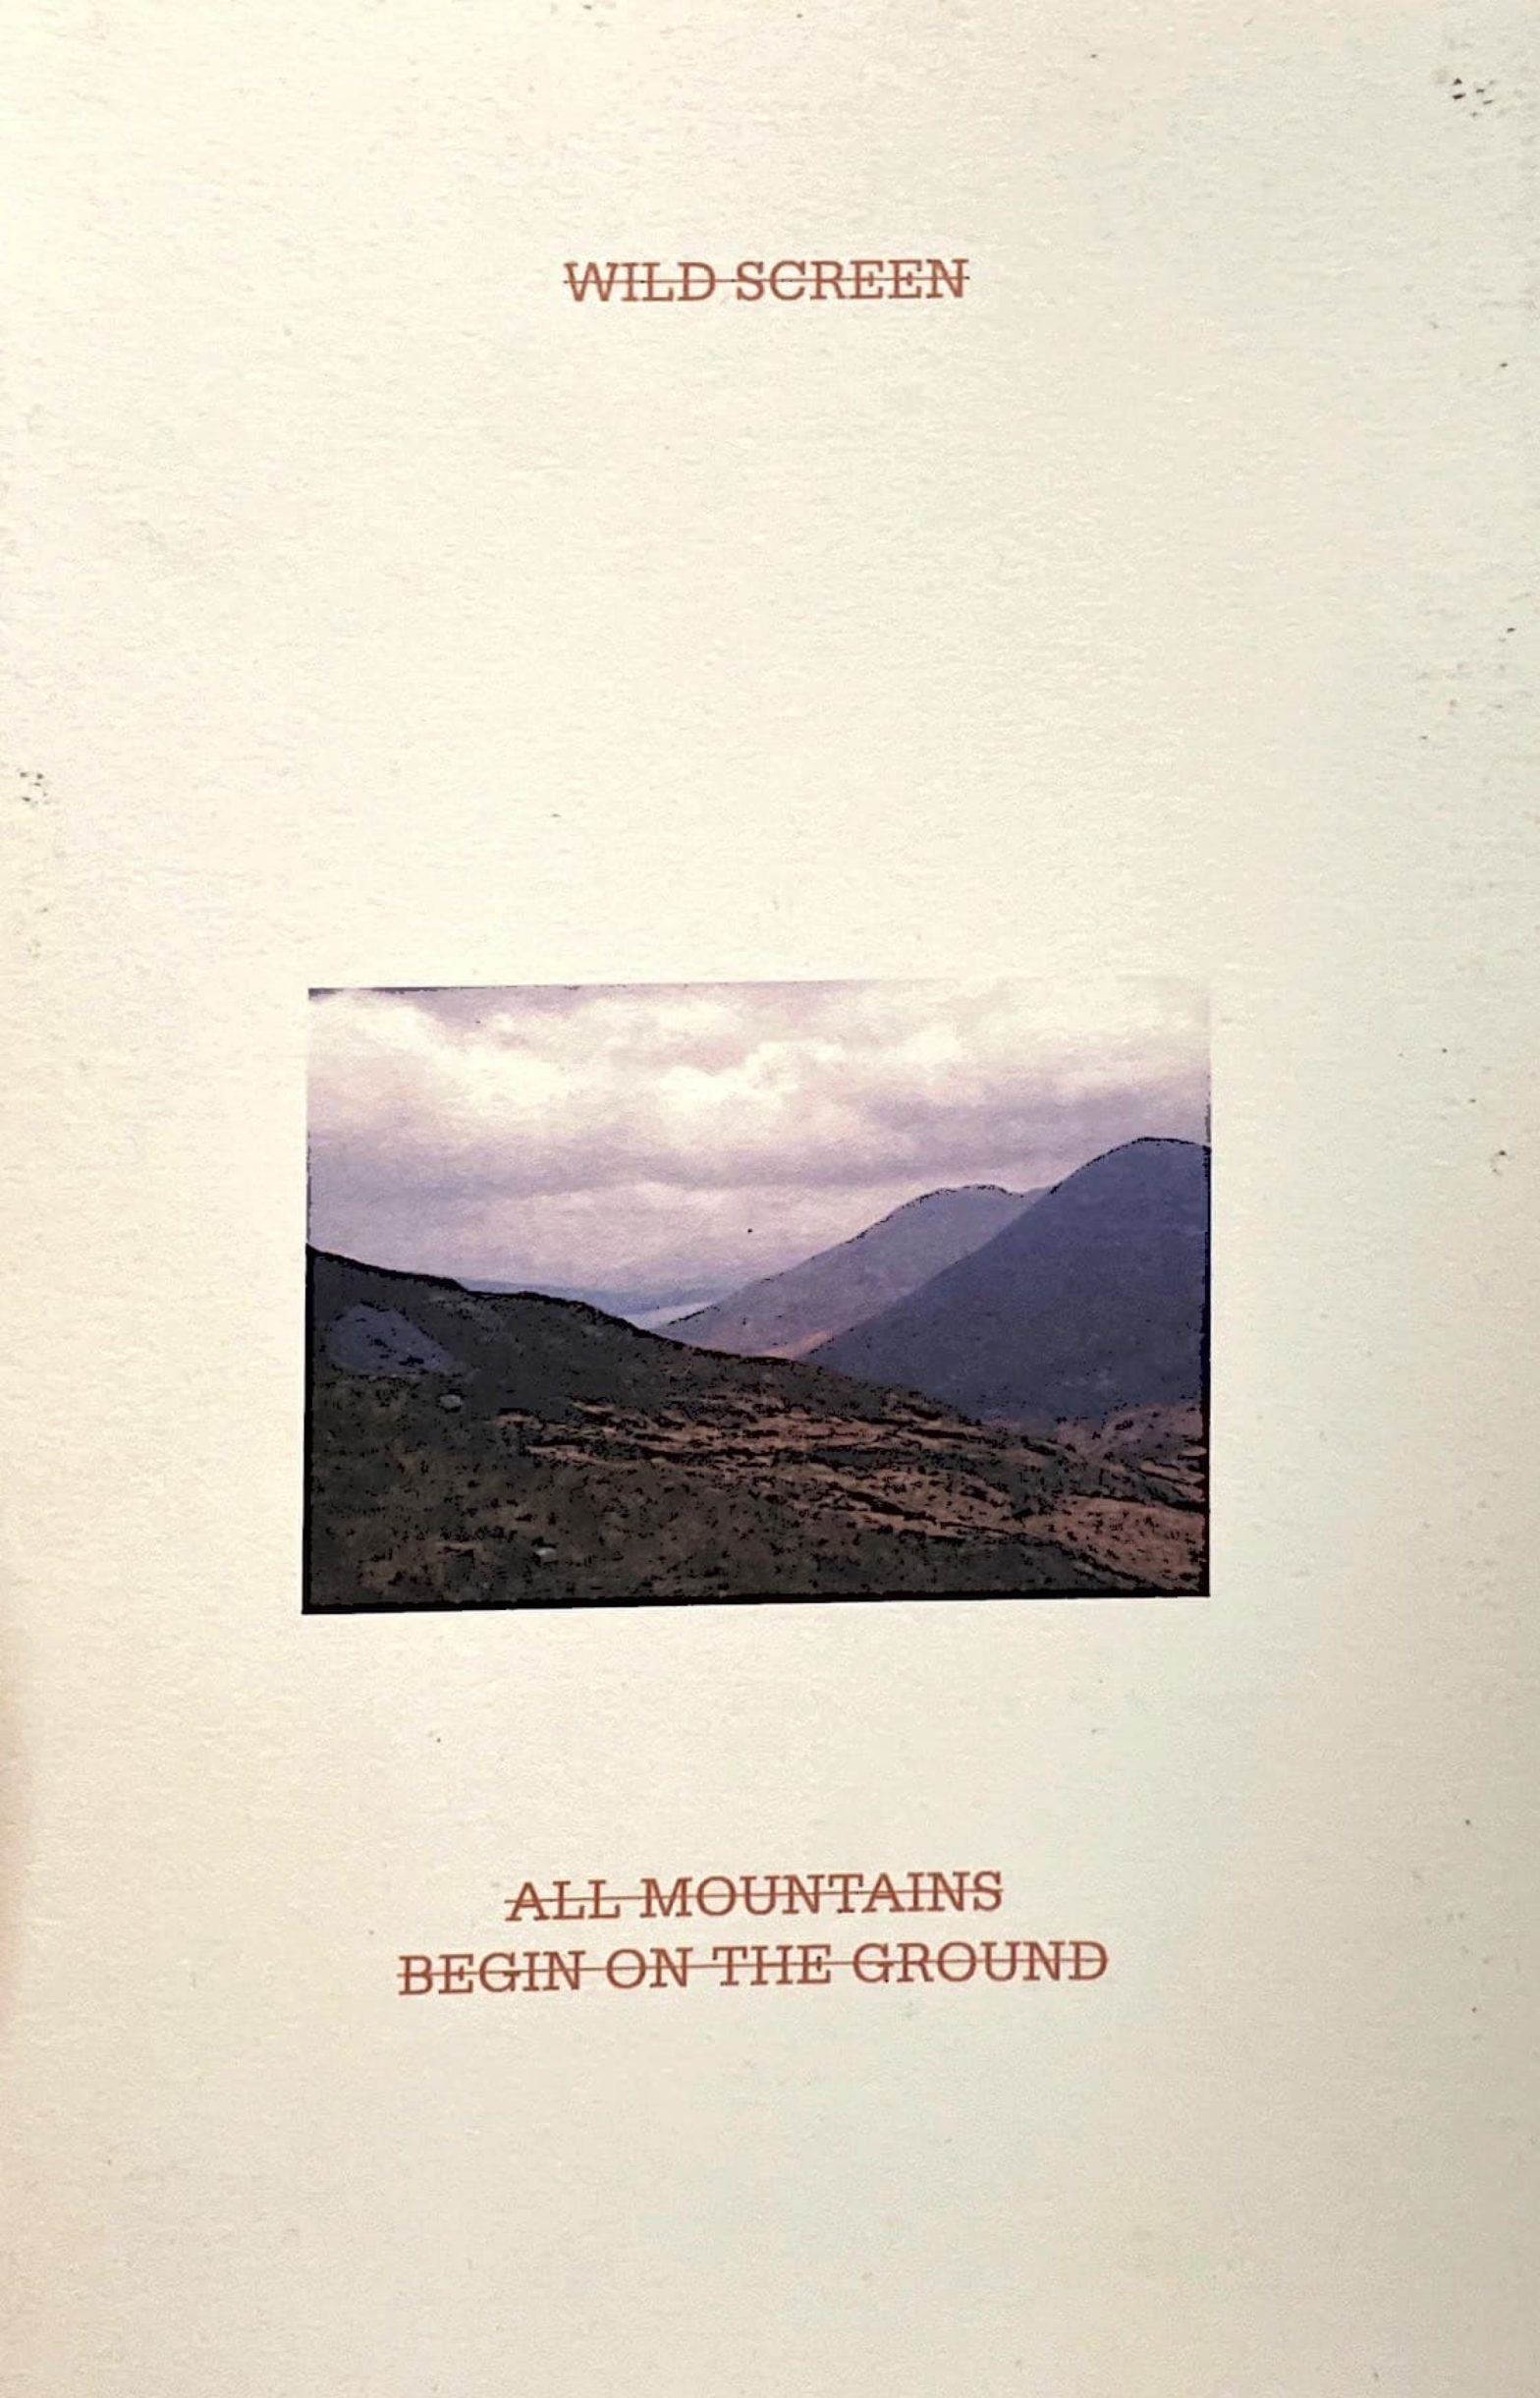 All Mountains Begin on the Ground